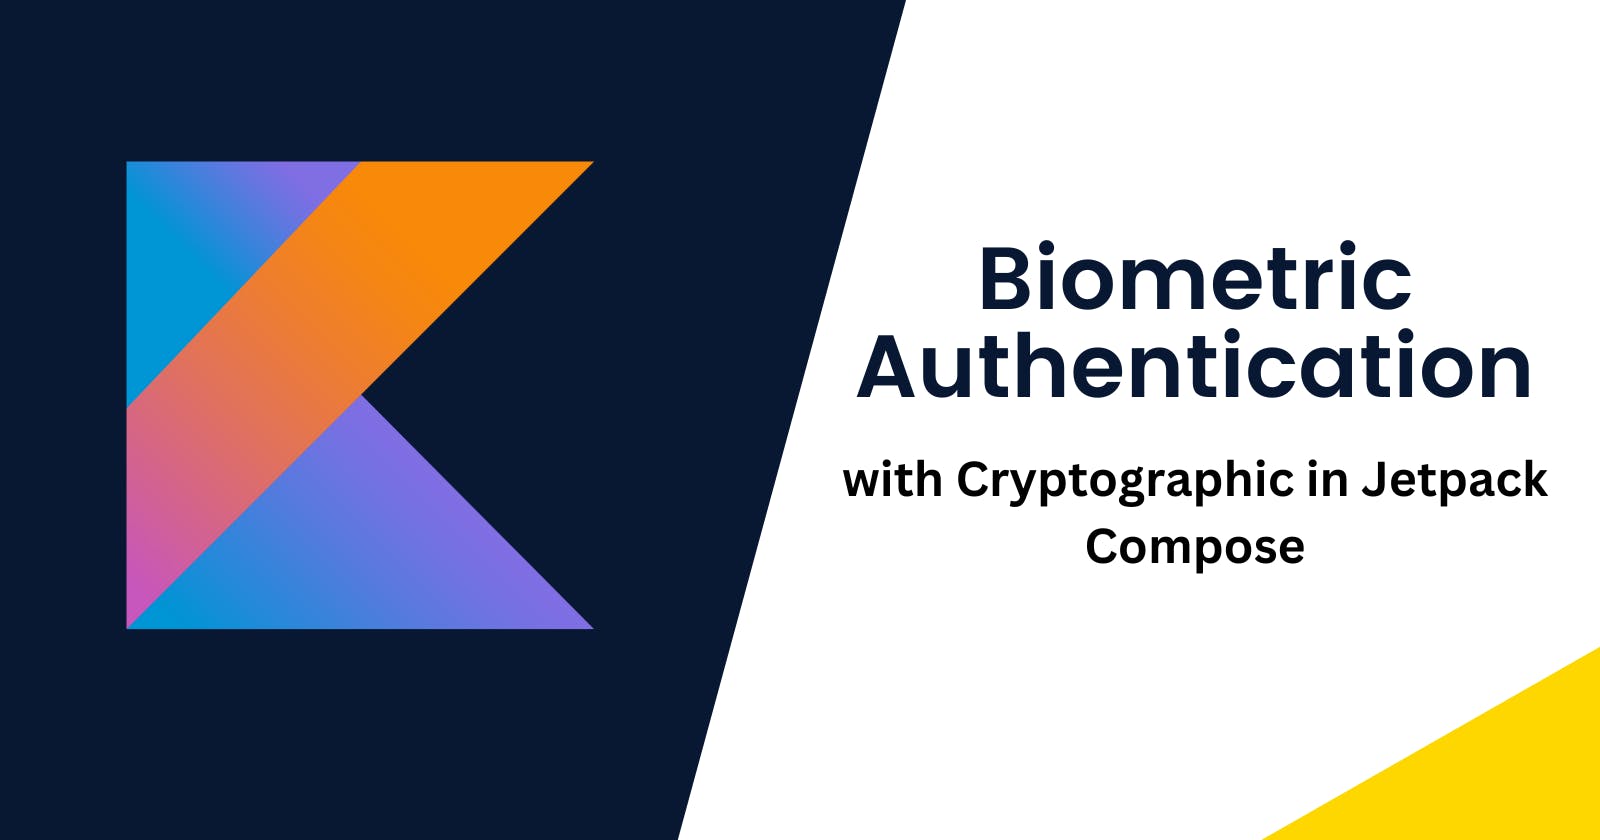 Biometric Authentication with Cryptographic in Jetpack Compose